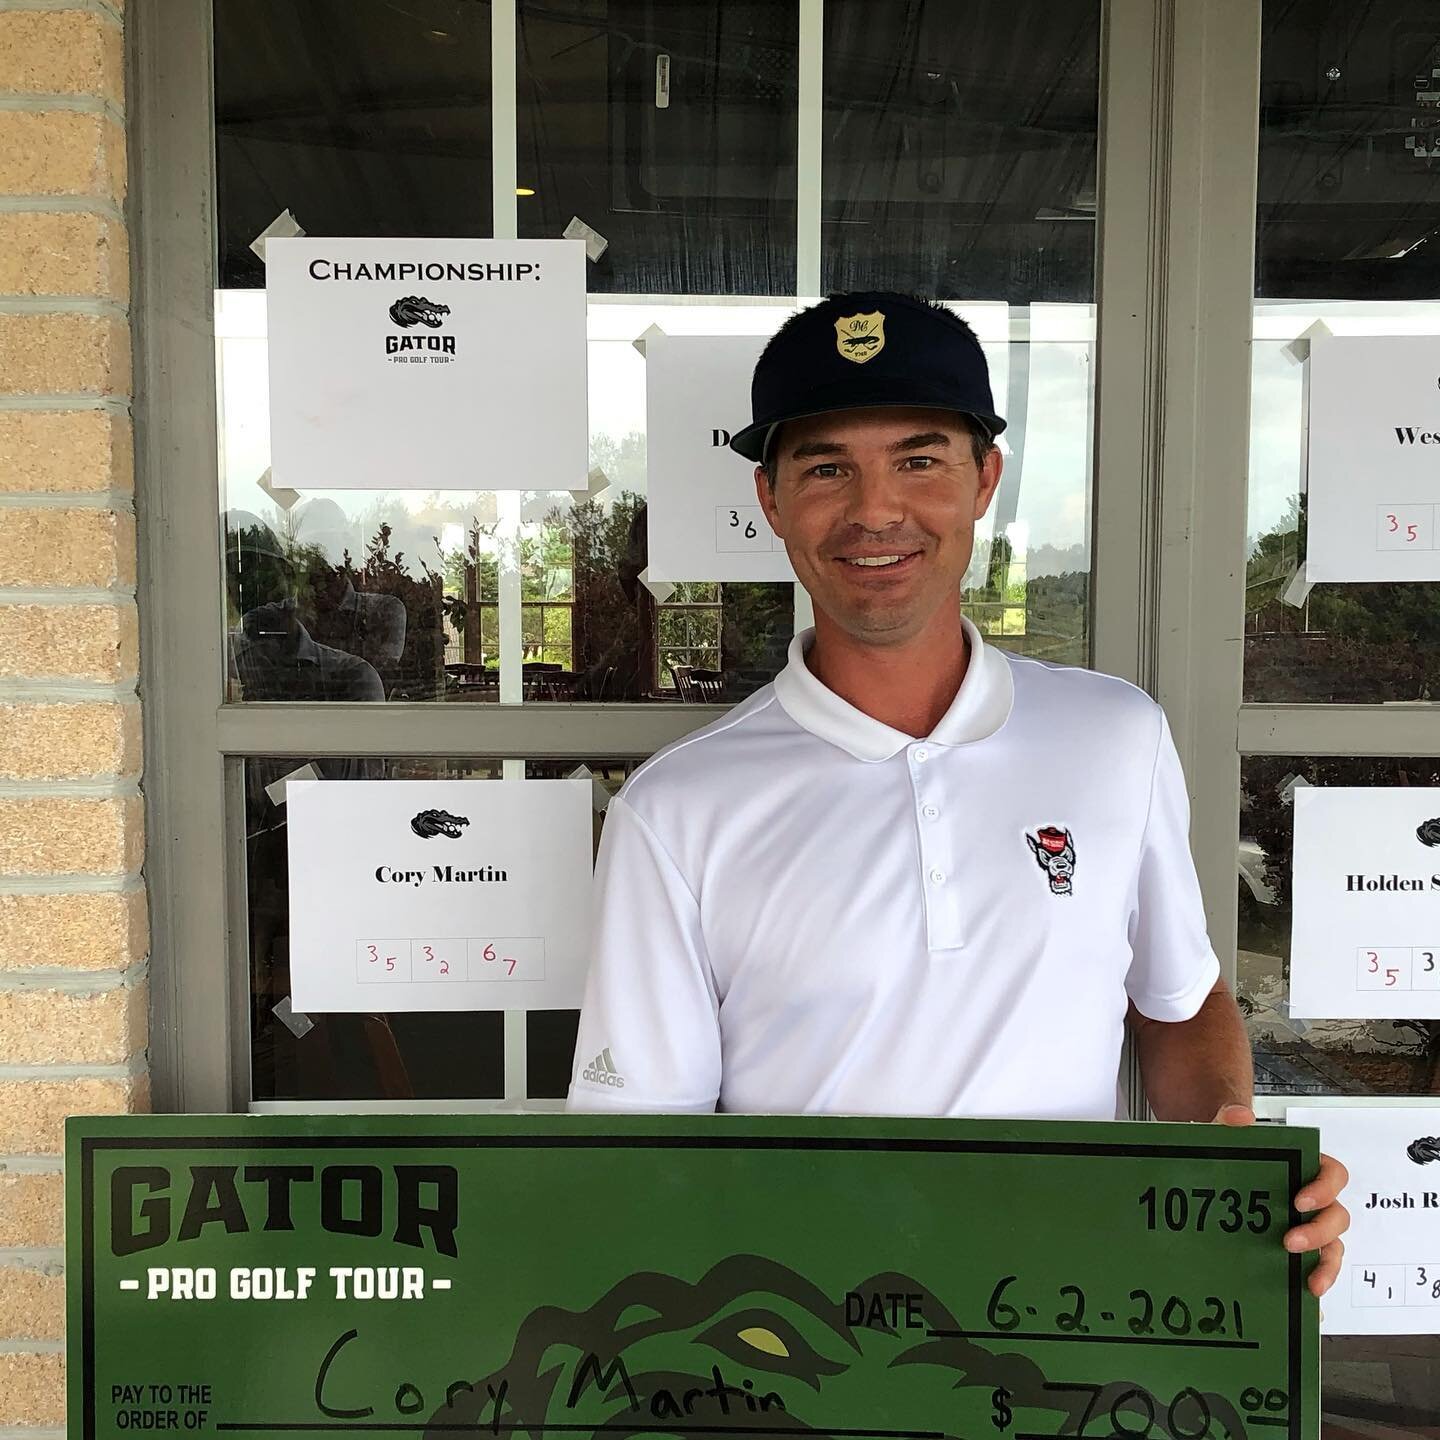 Cory Martin went &ldquo;unconscious&rdquo; as his playing partners called it to birdie 4 of his last 5 holes to shoot -5 67 in windy rainy conditions for the win! 

Congratulations Wiley Fogleman for his 78 to win the Amateur Field! 

Good luck to al